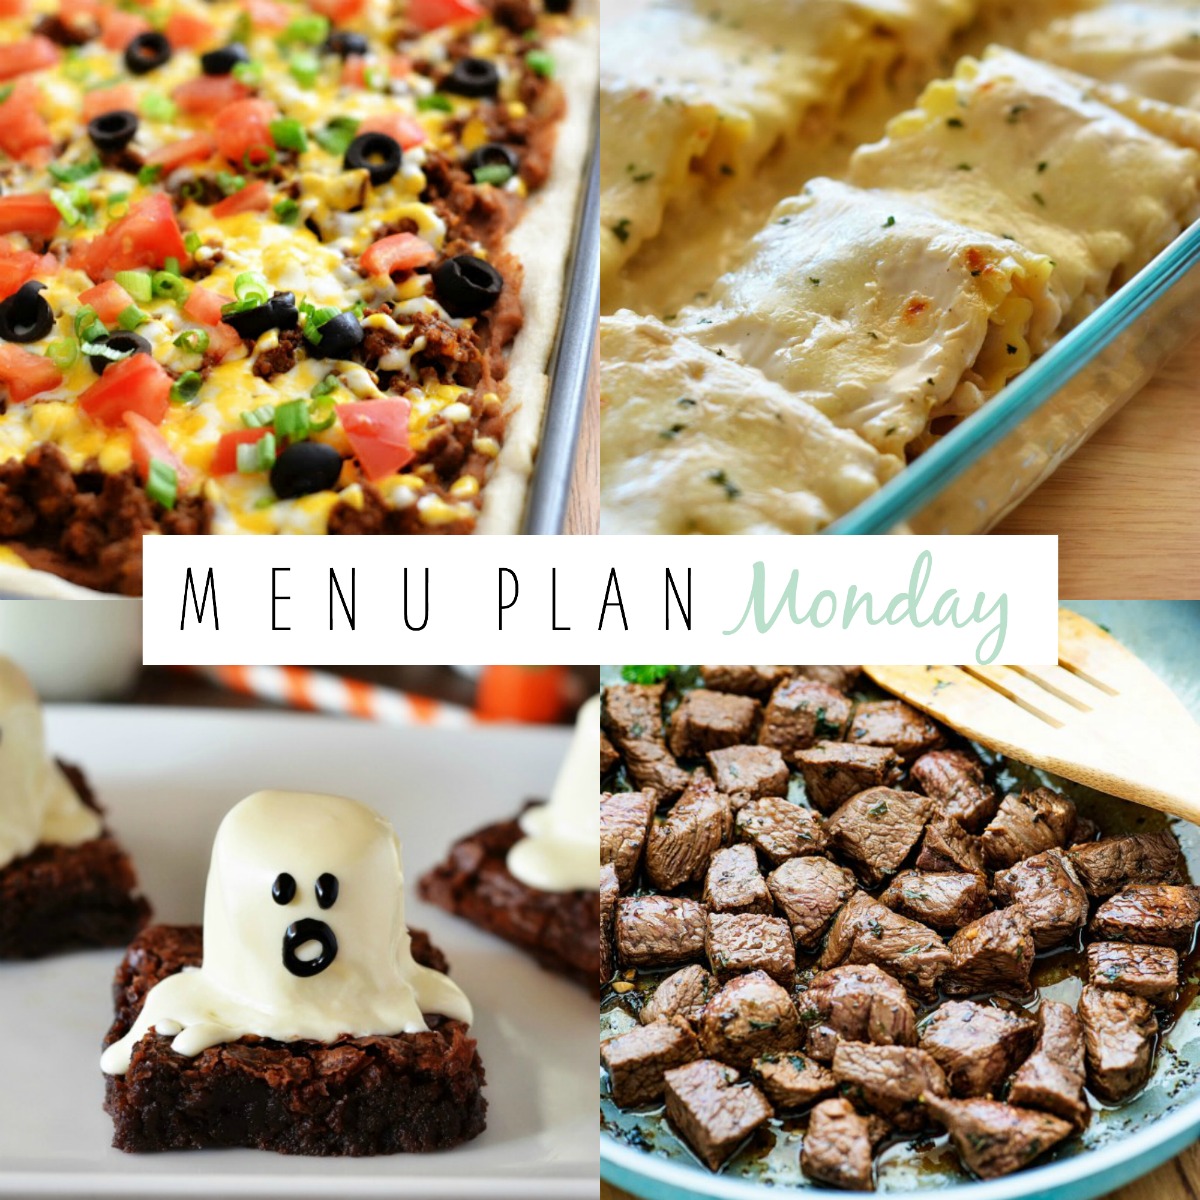 Lots of easy and delicious dinner ideas on this week's menu!